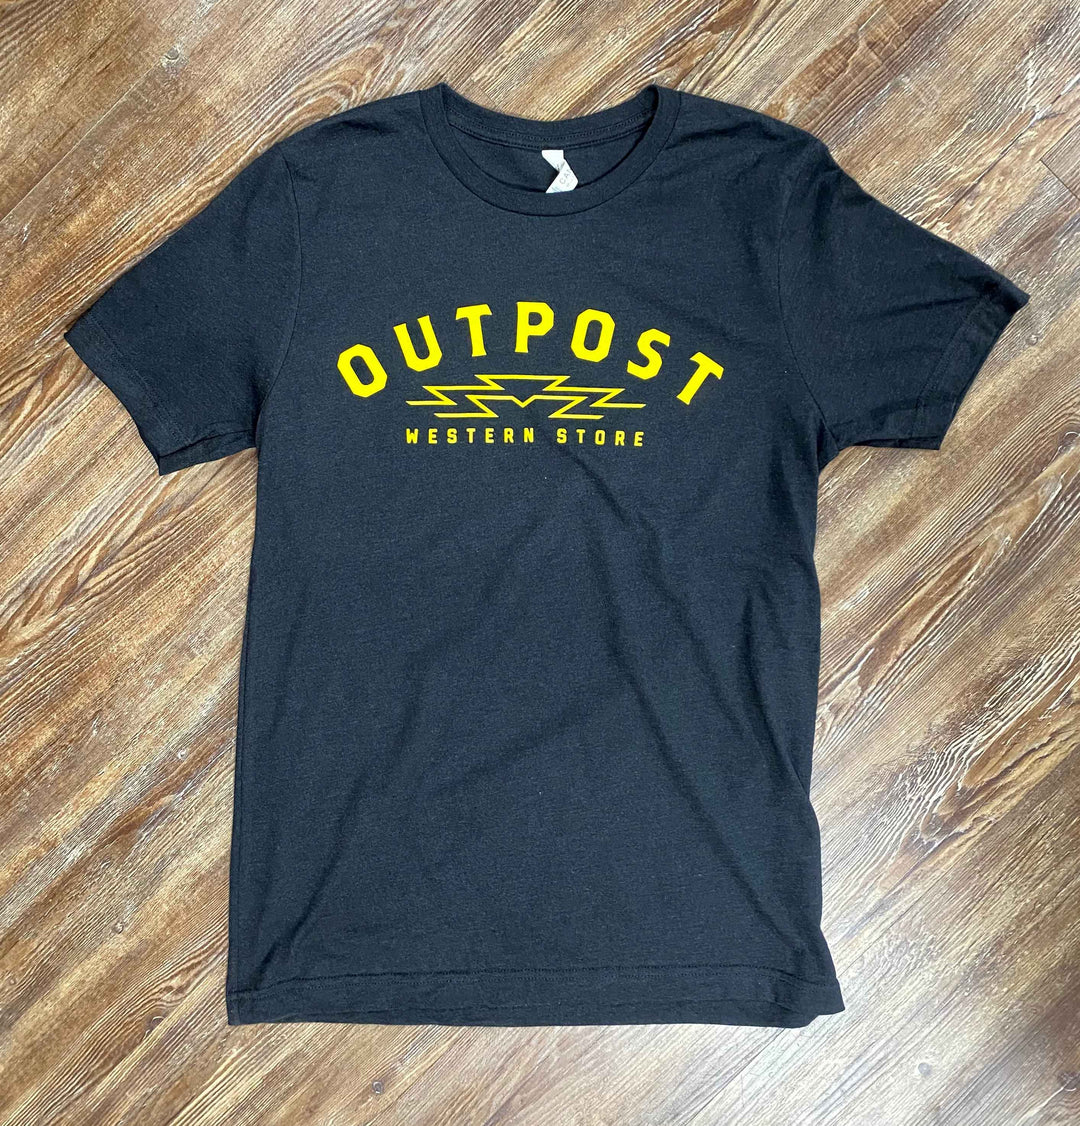 Outpost Sunrise Tee black with yellow gold screen print